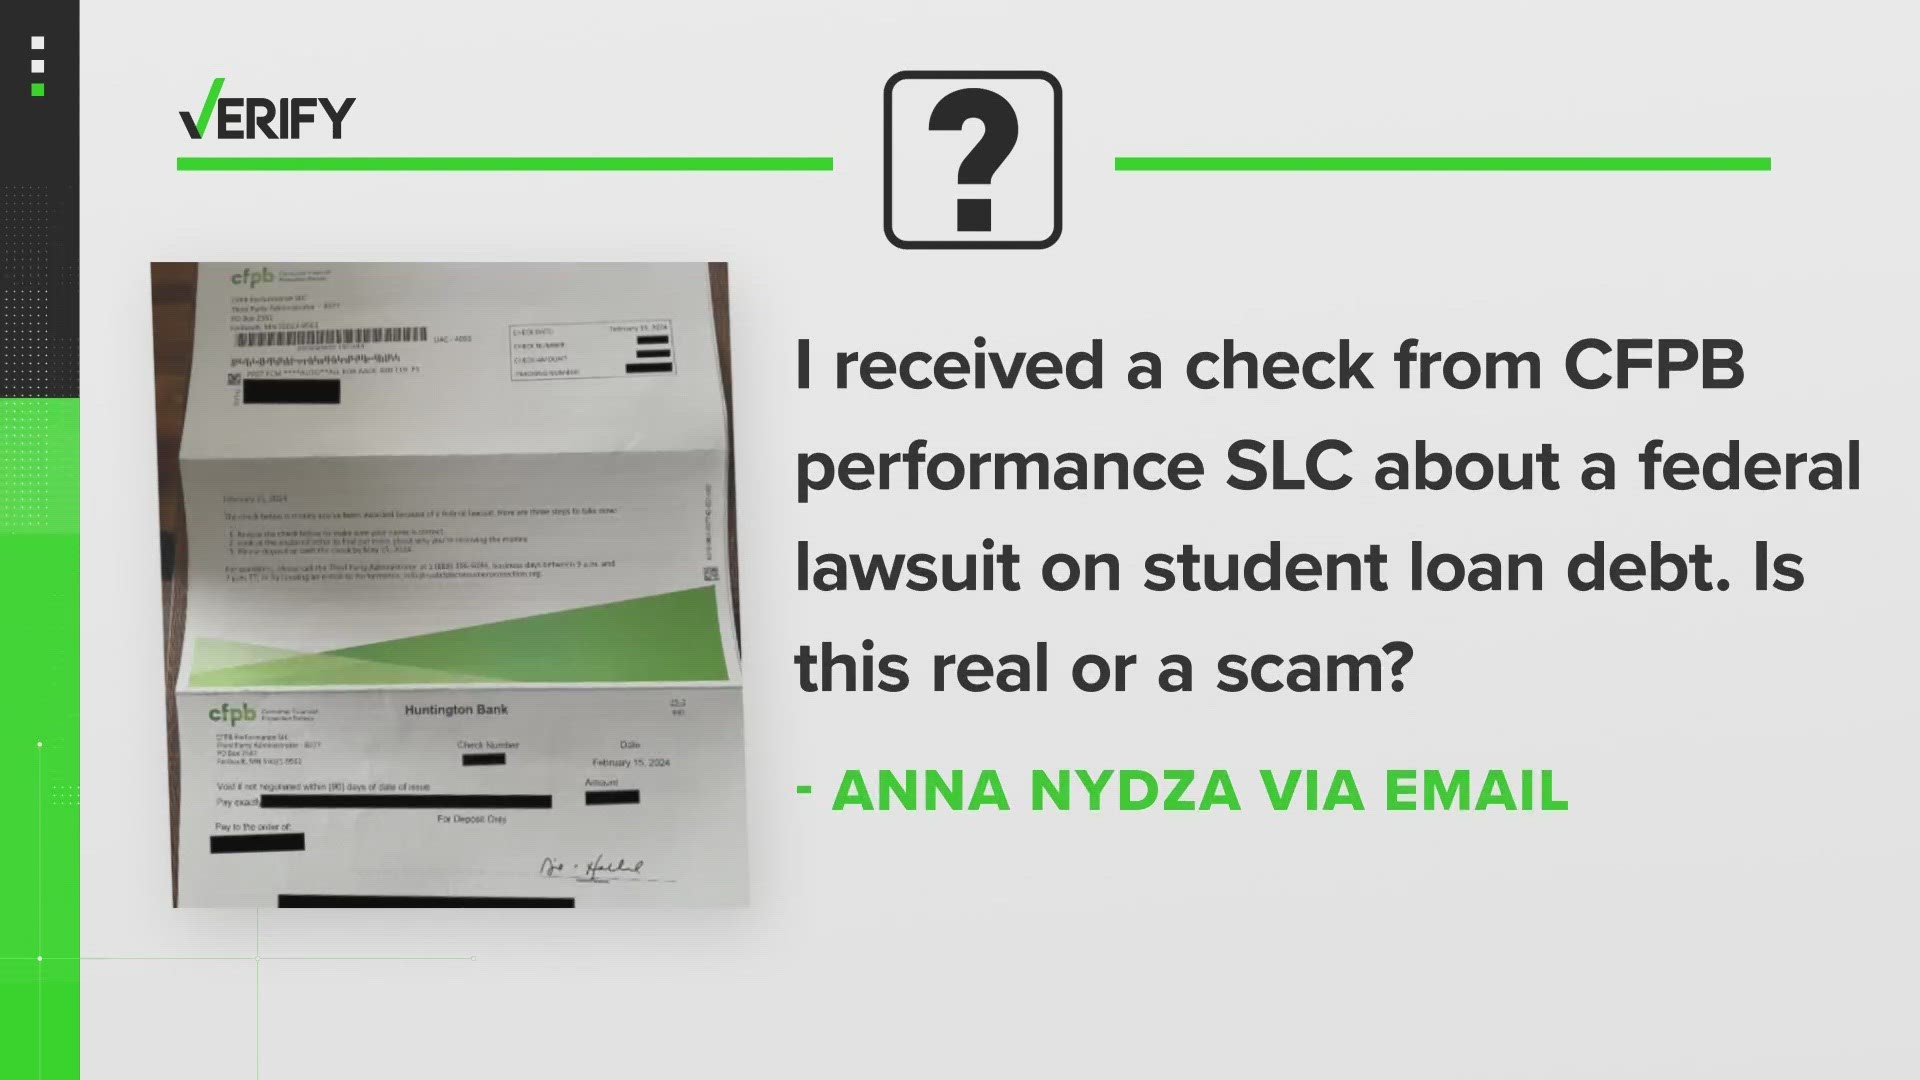 These checks are a result of defendants being accused of charging illegal upfront fees for federal student loan debt management services, and deceiving people